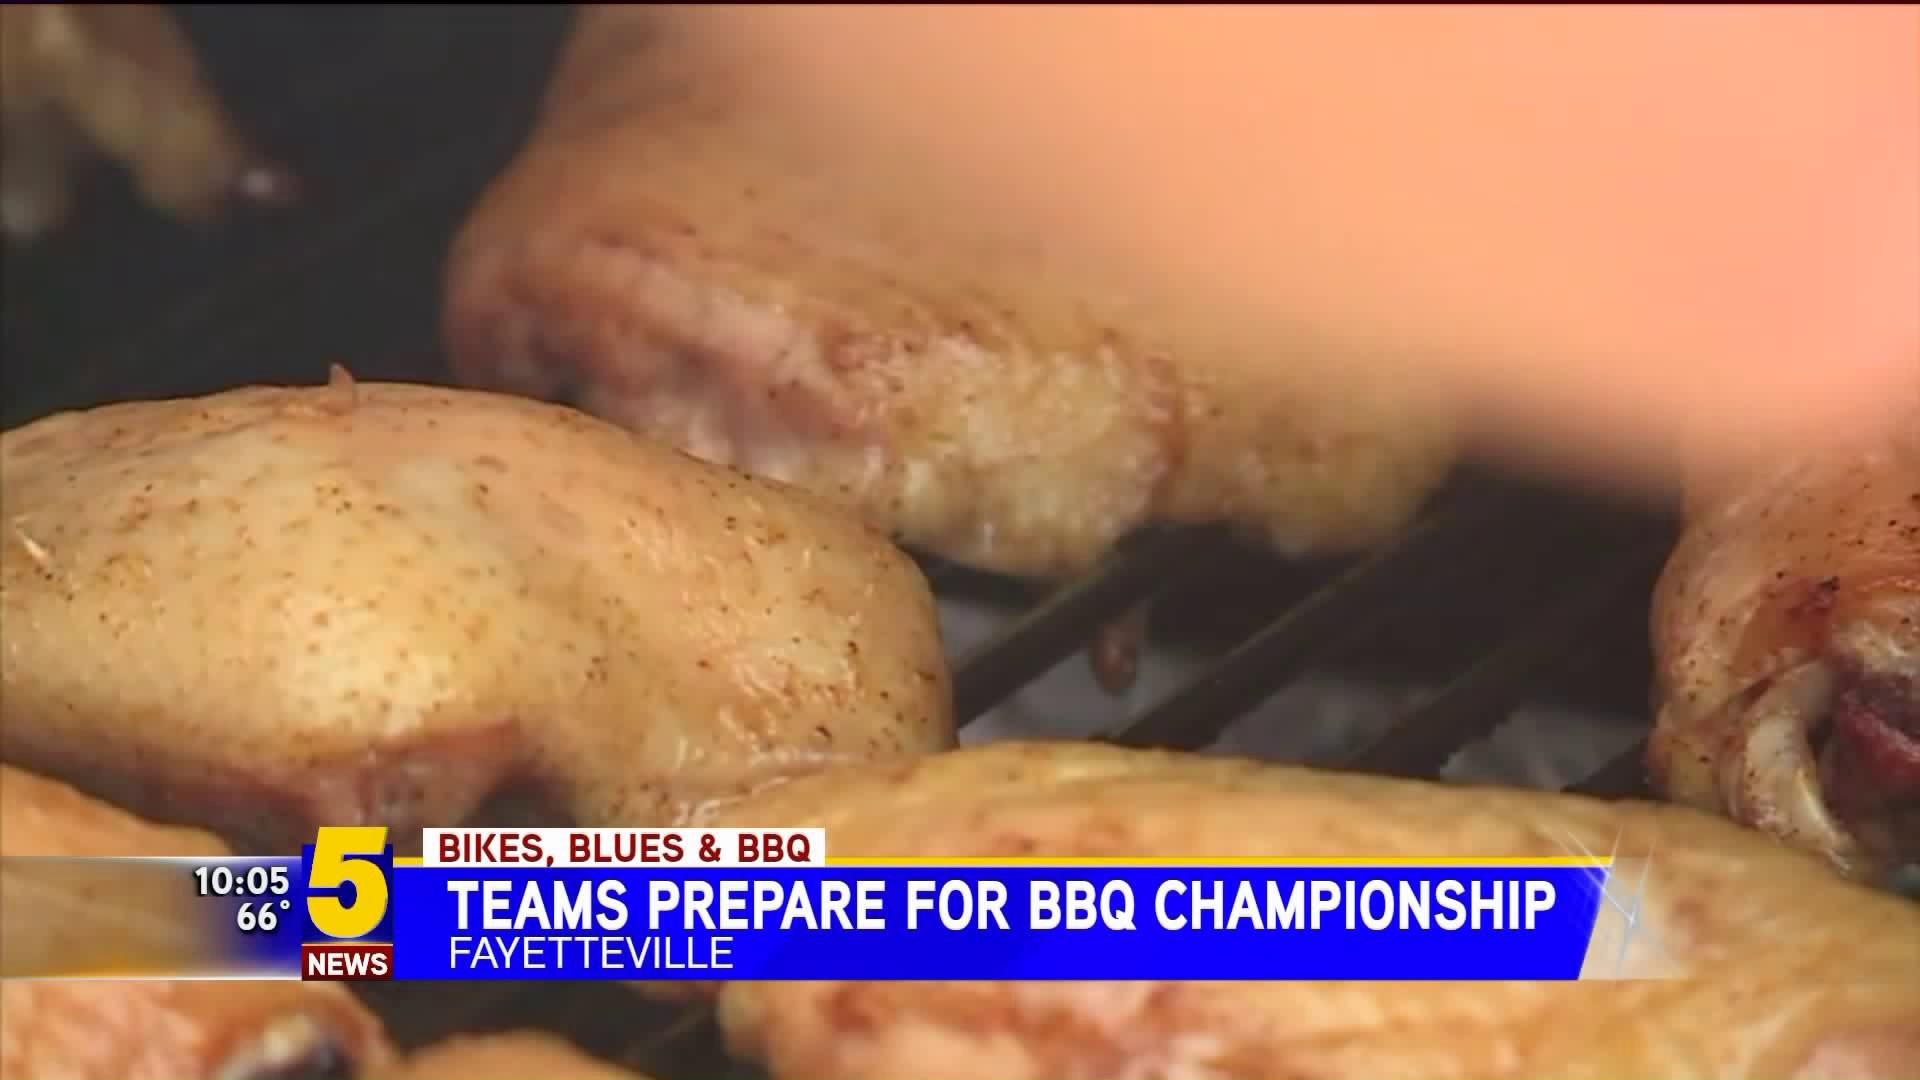 Teams Prepare For BBQ Championship At Motorcycle Rally